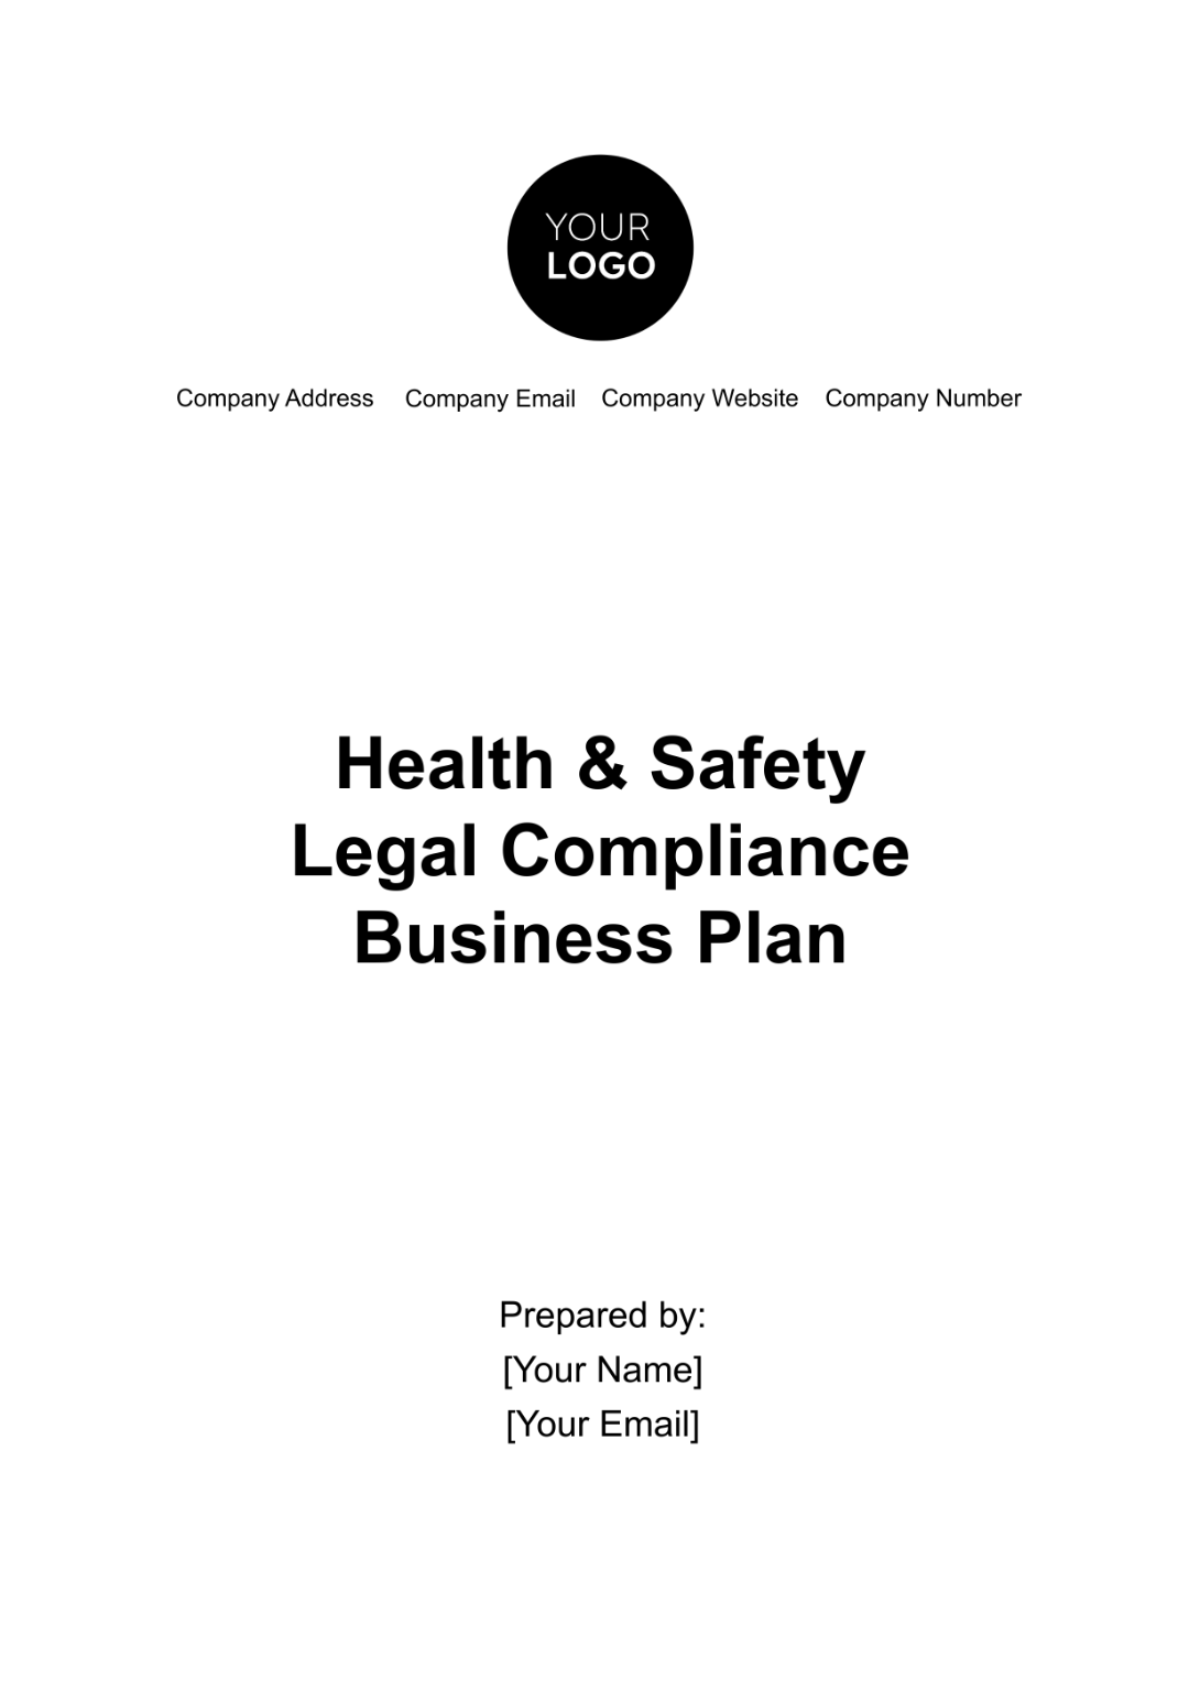 Free Health & Safety Legal Compliance Business Plan Template